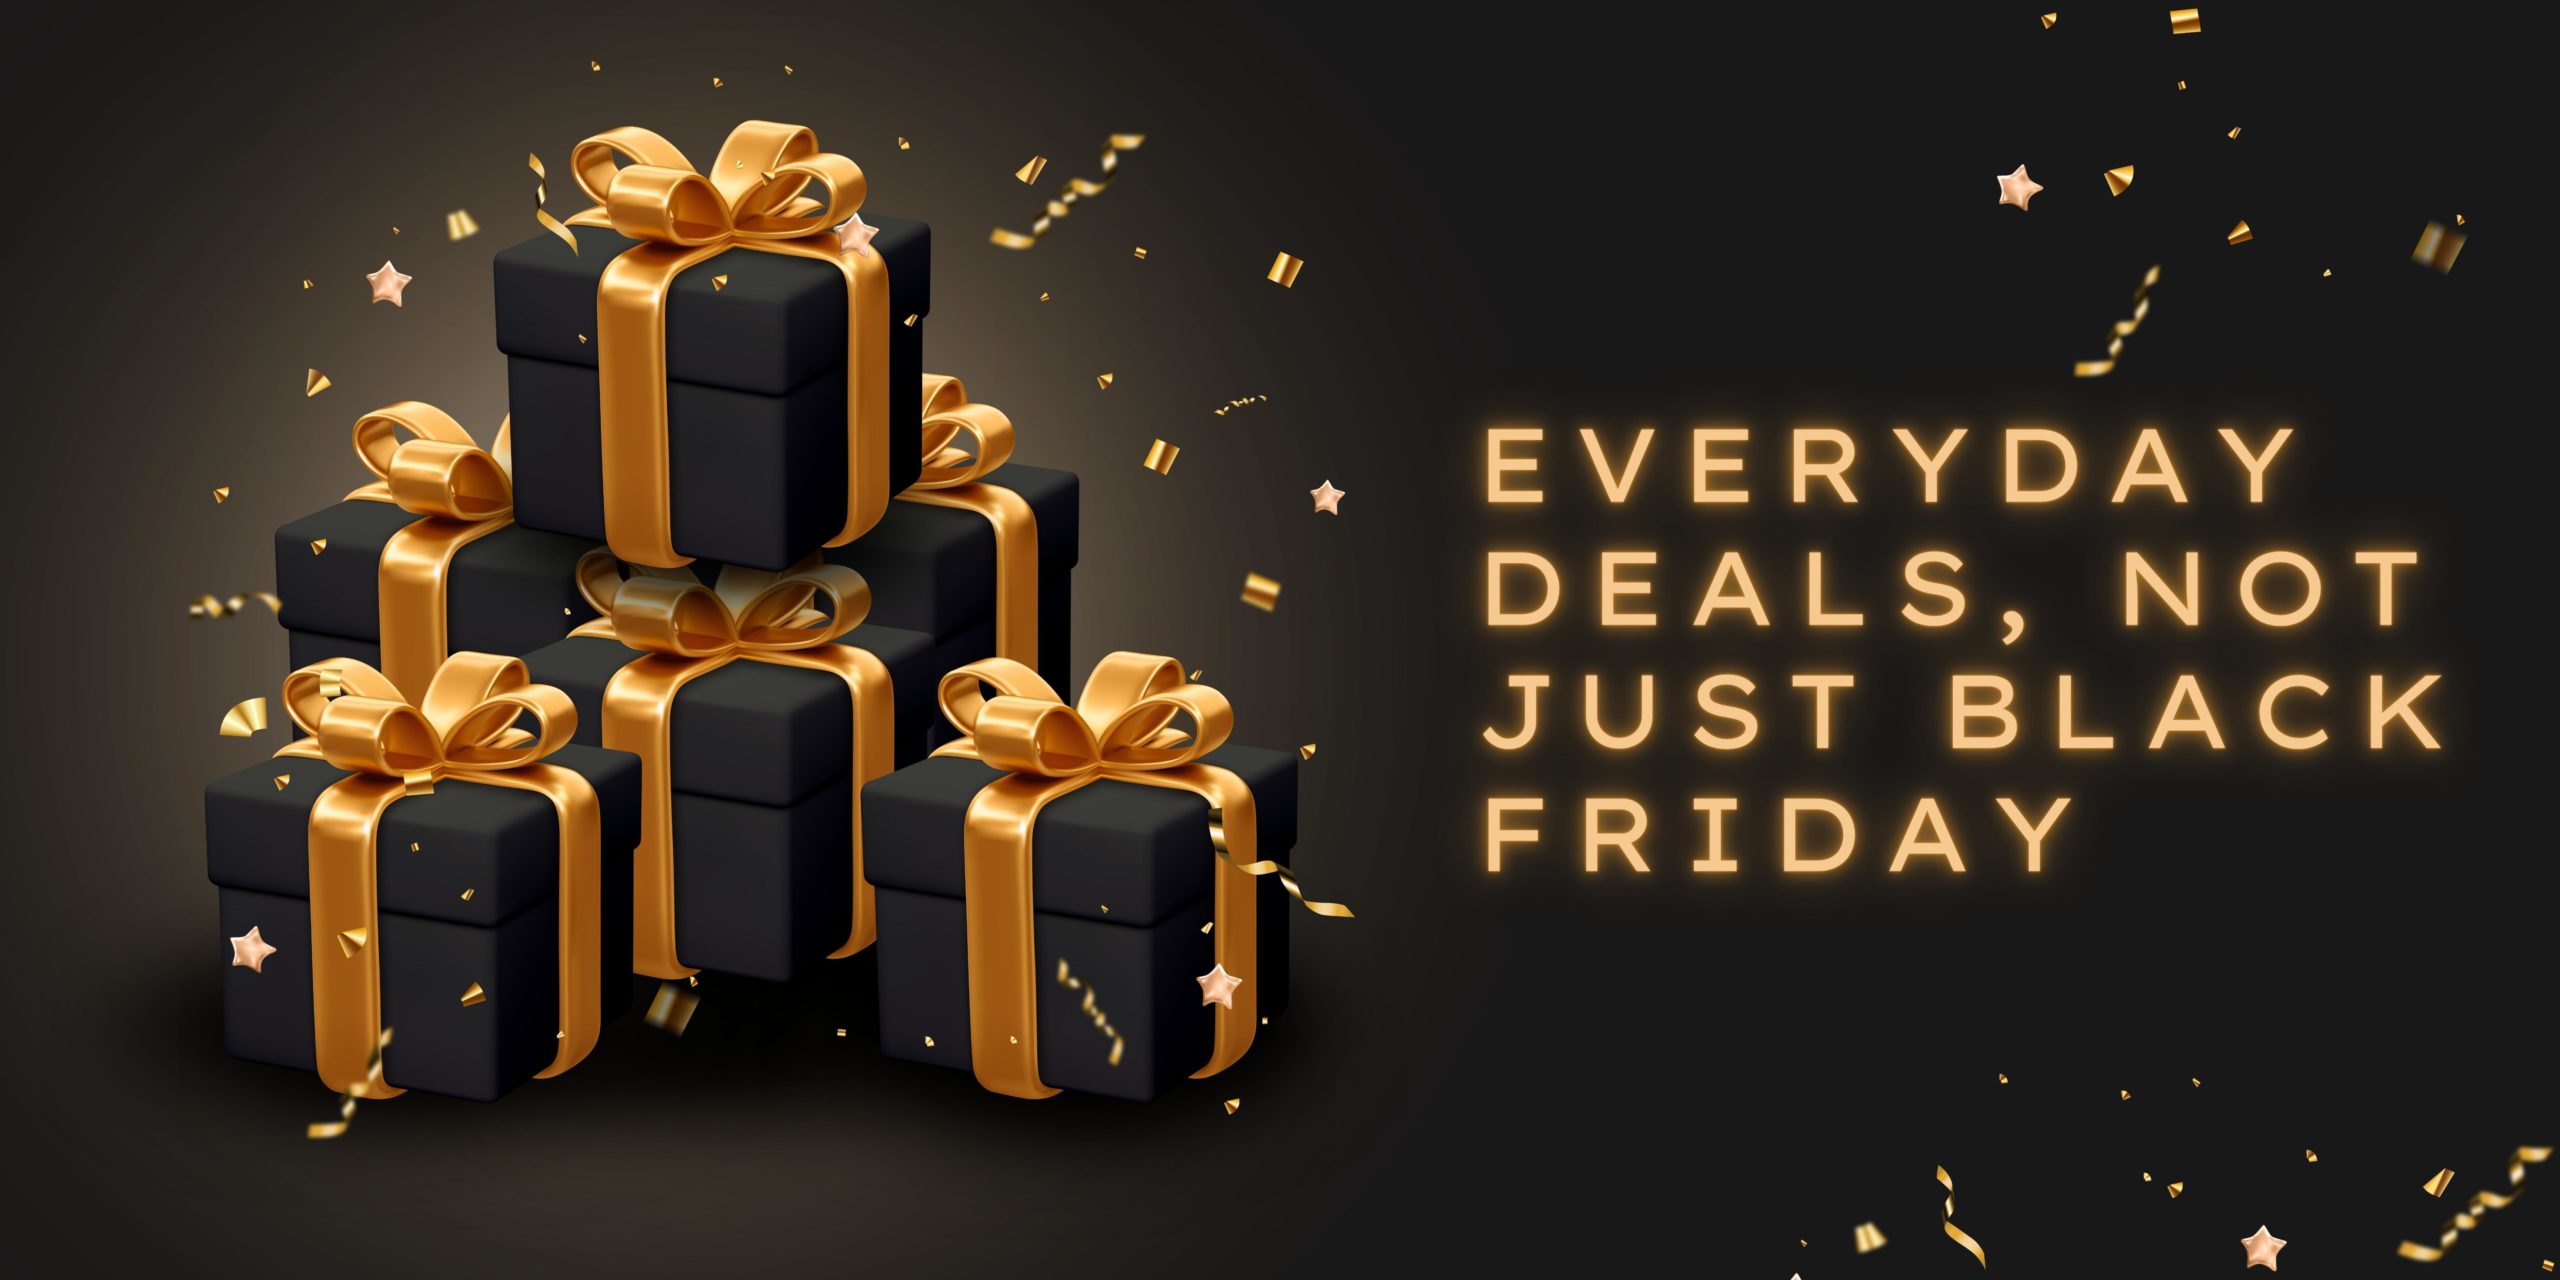 premiumonlinevaping.com best black friday deal for vaping products red gold traditional black friday medium banner scaled